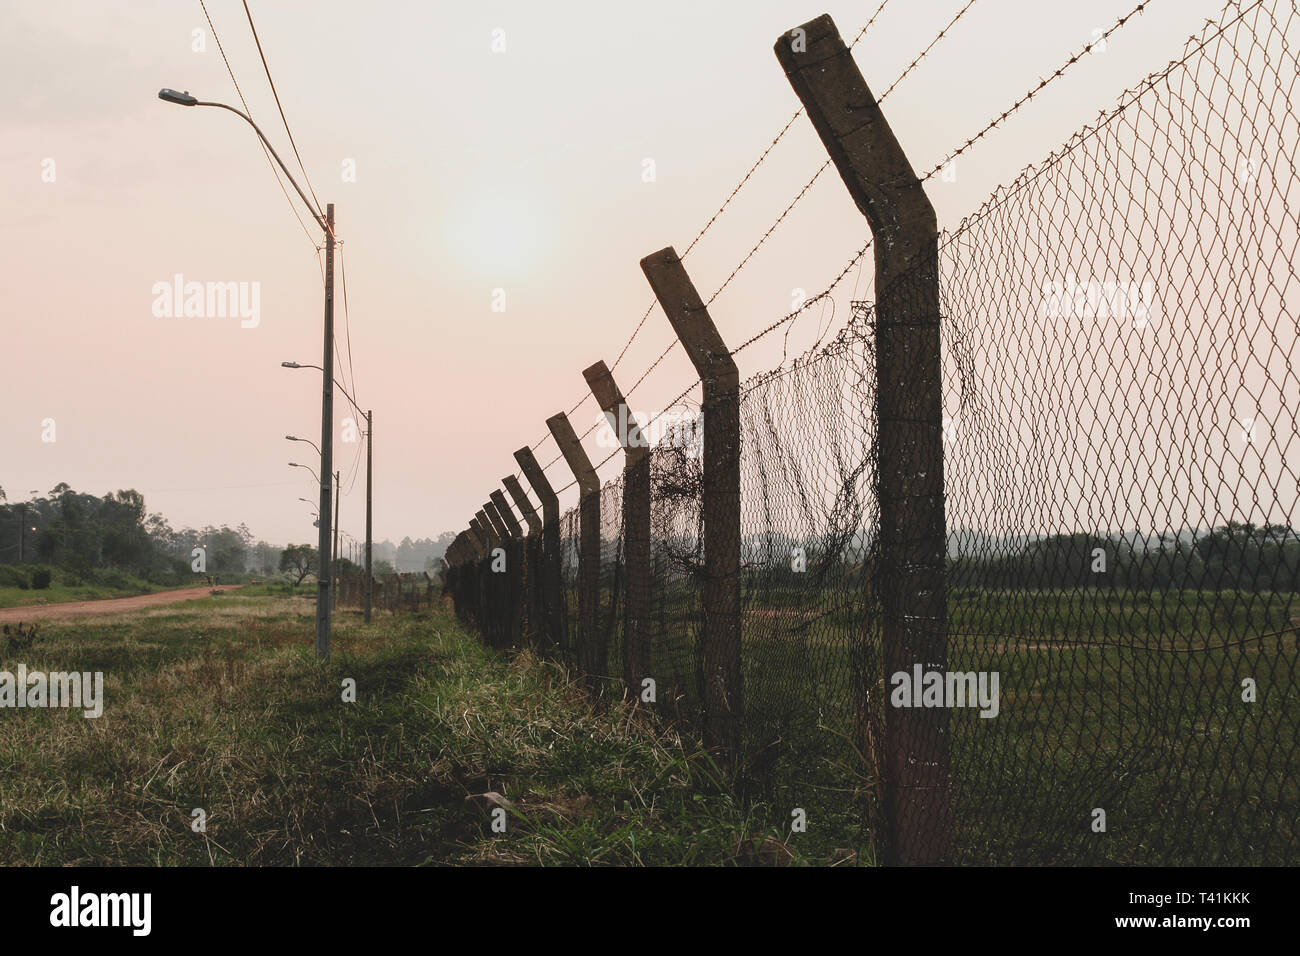 Perimeter fence, chain-link fencing showing the diamond patterning, with barbed wire protecting a property. Vintage toned Stock Photo